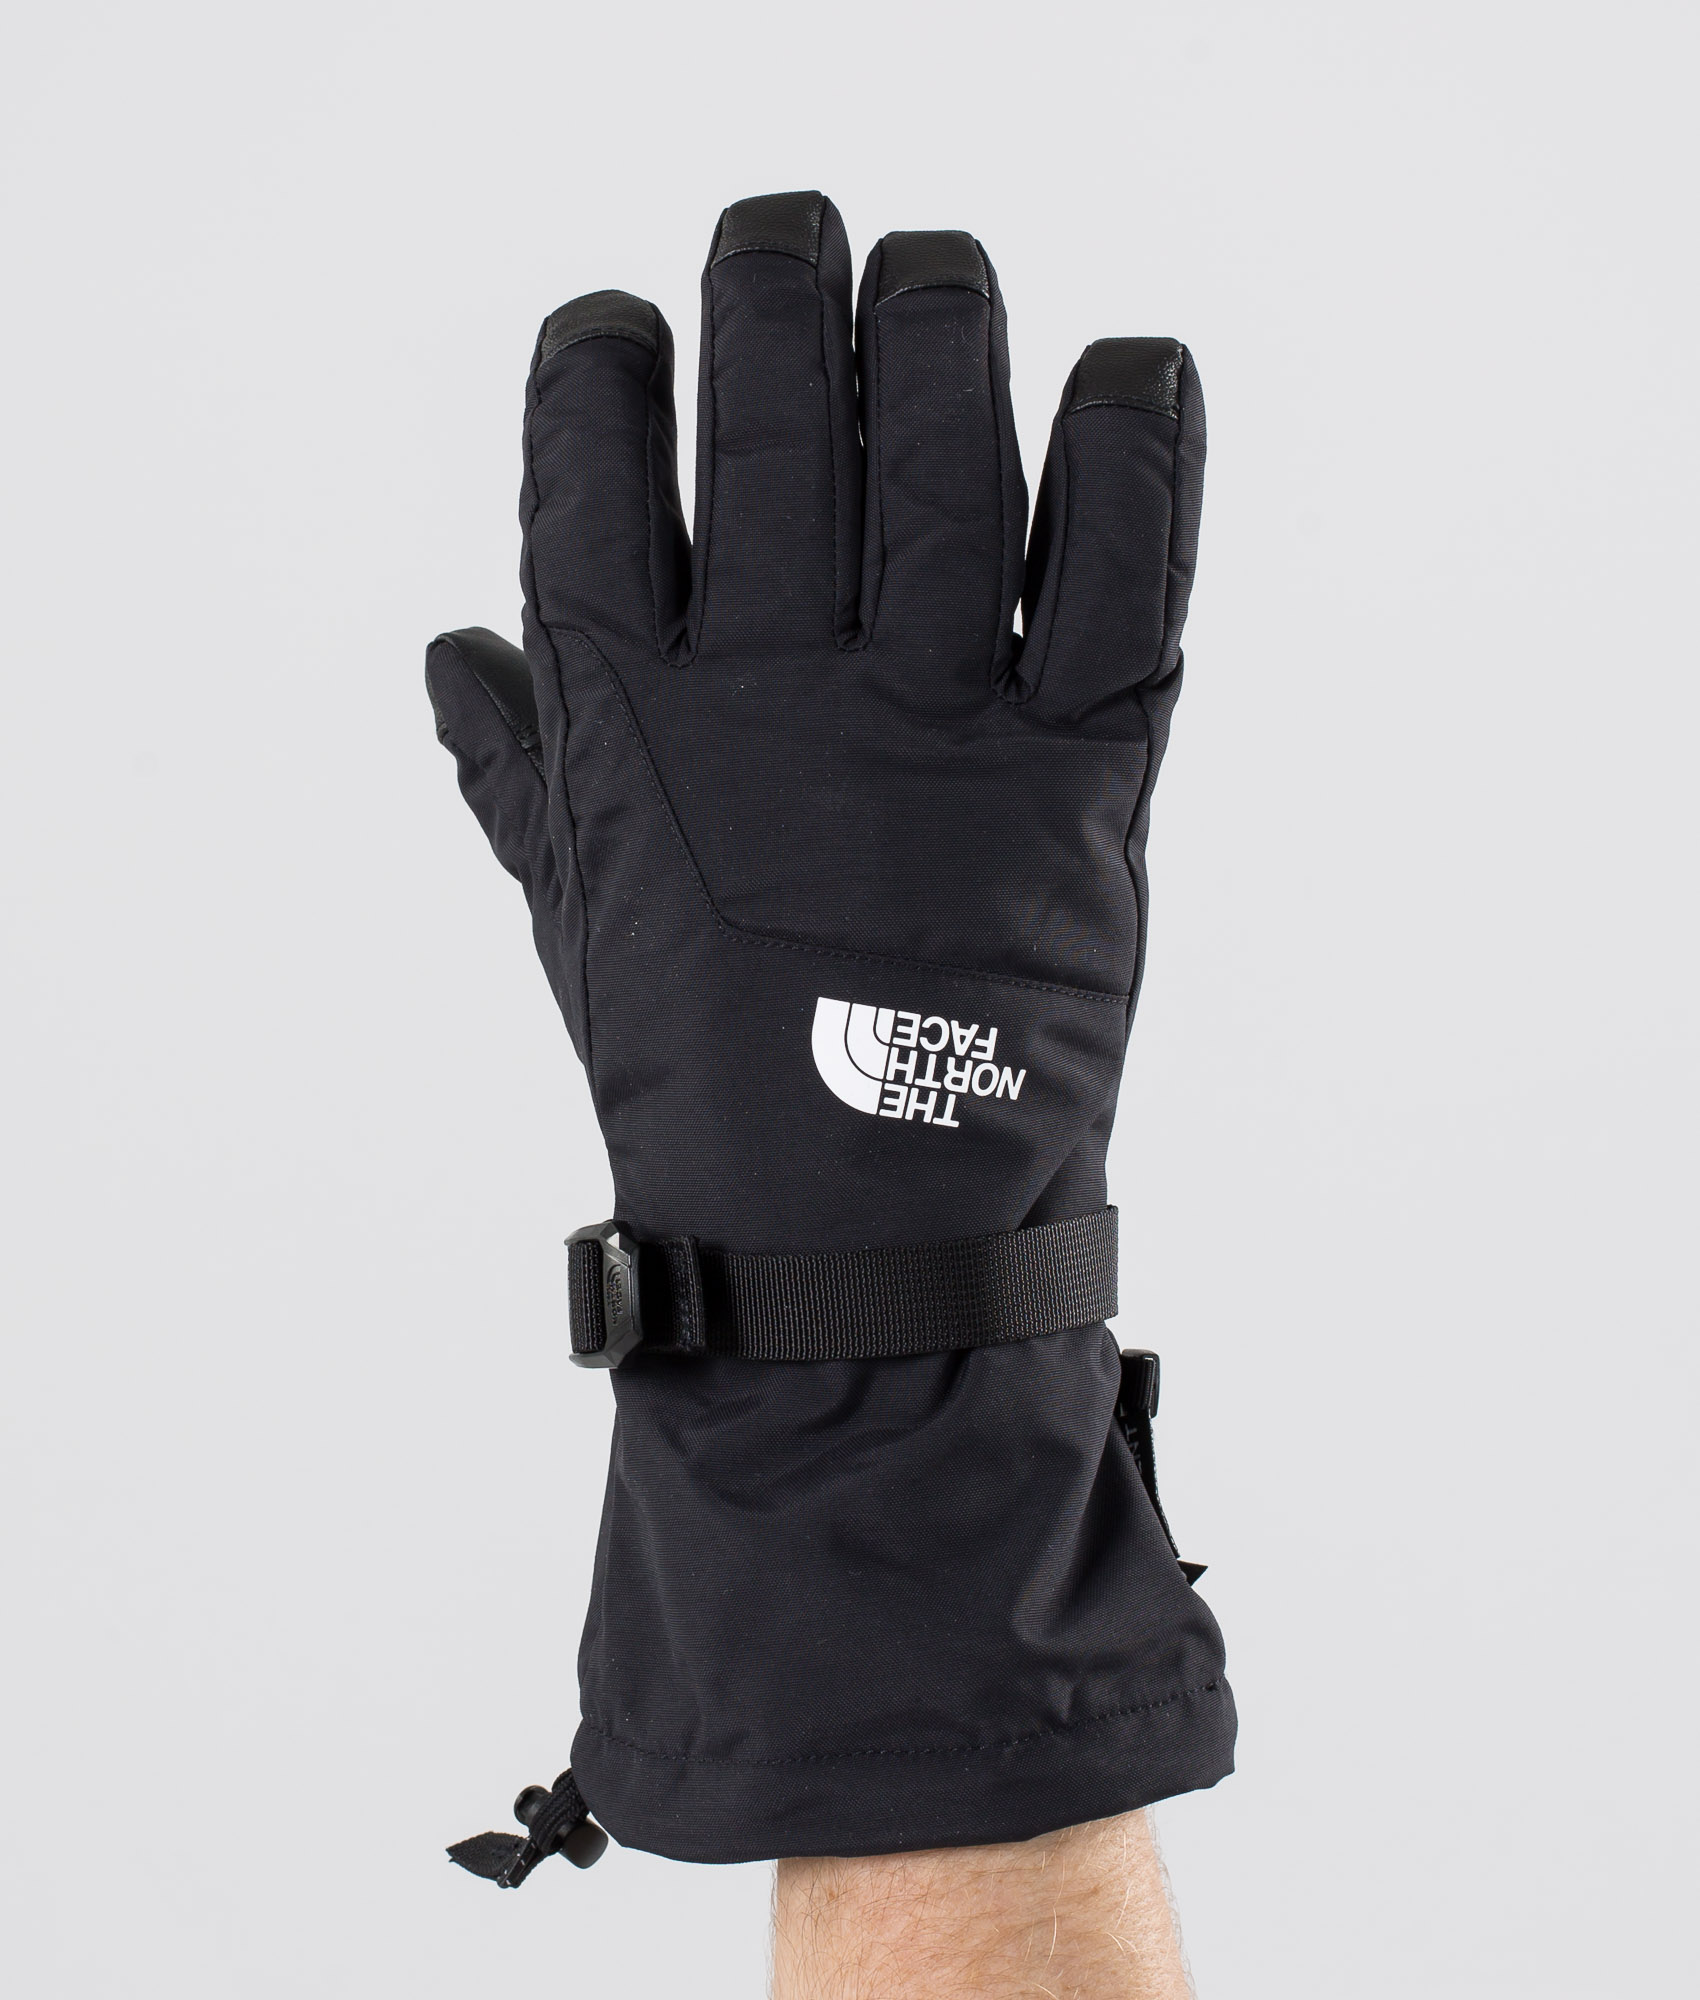 north face snowboarding gloves